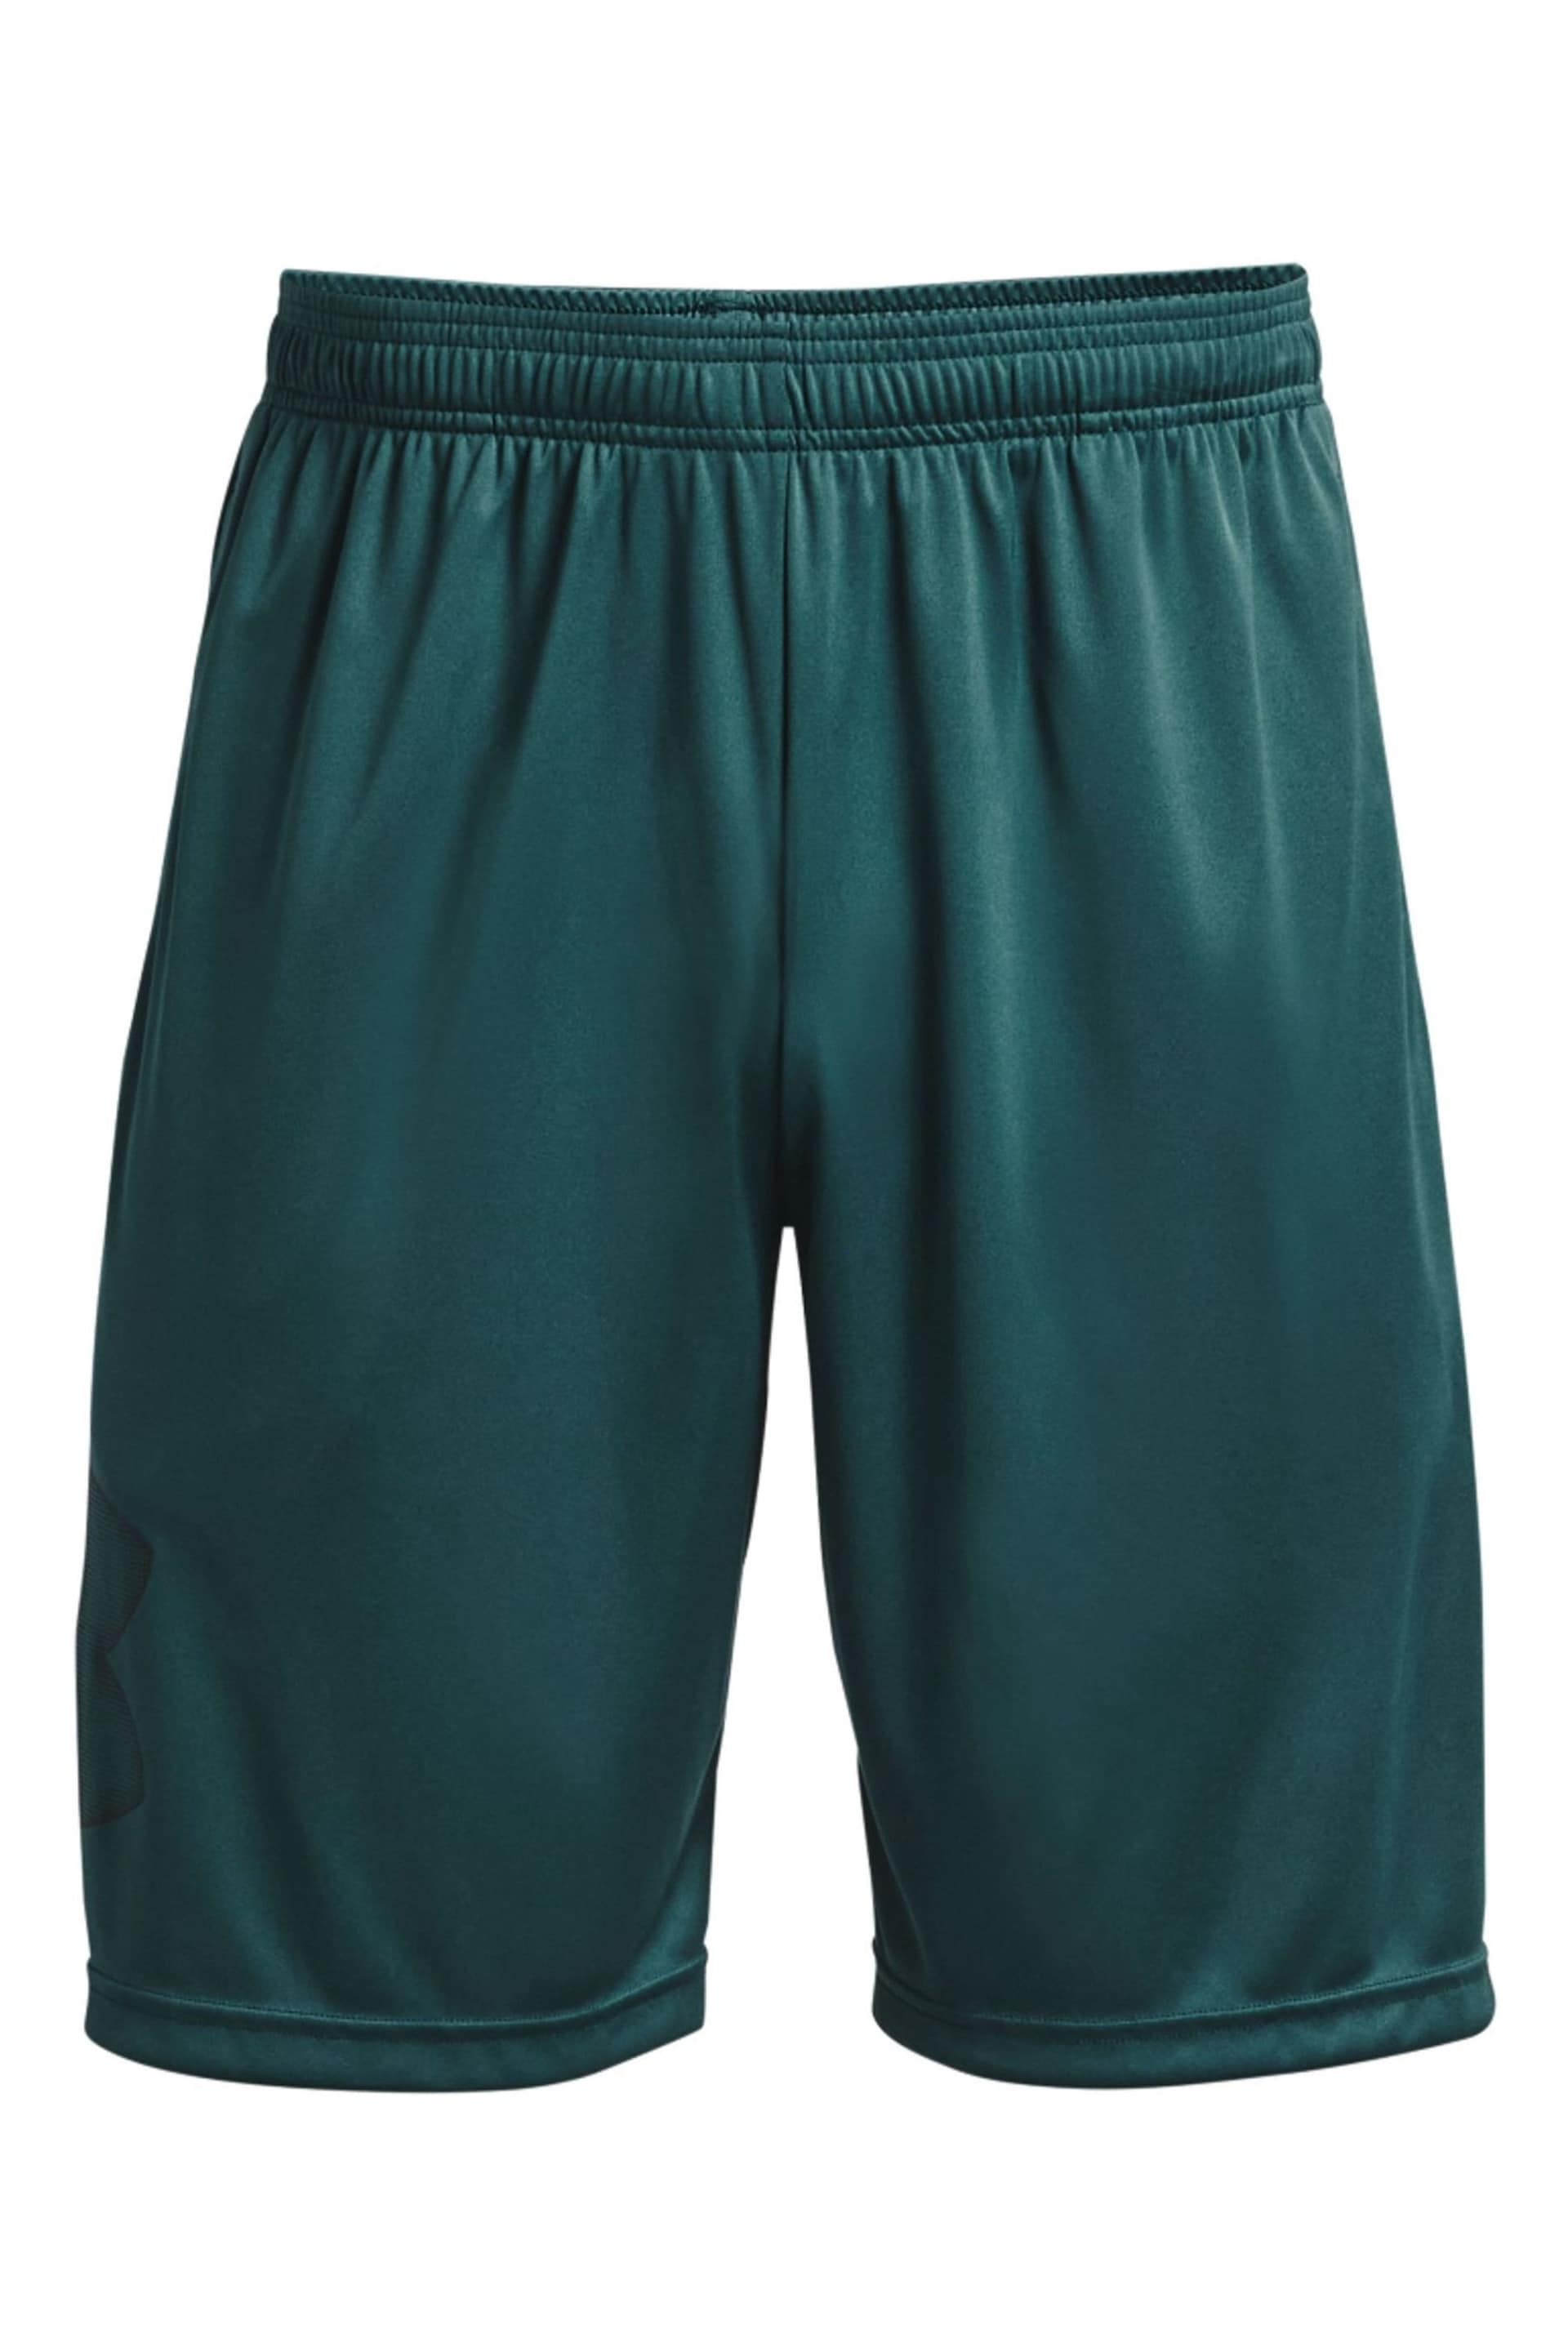 Under Armour Tech Graphic Shorts - Image 1 of 4